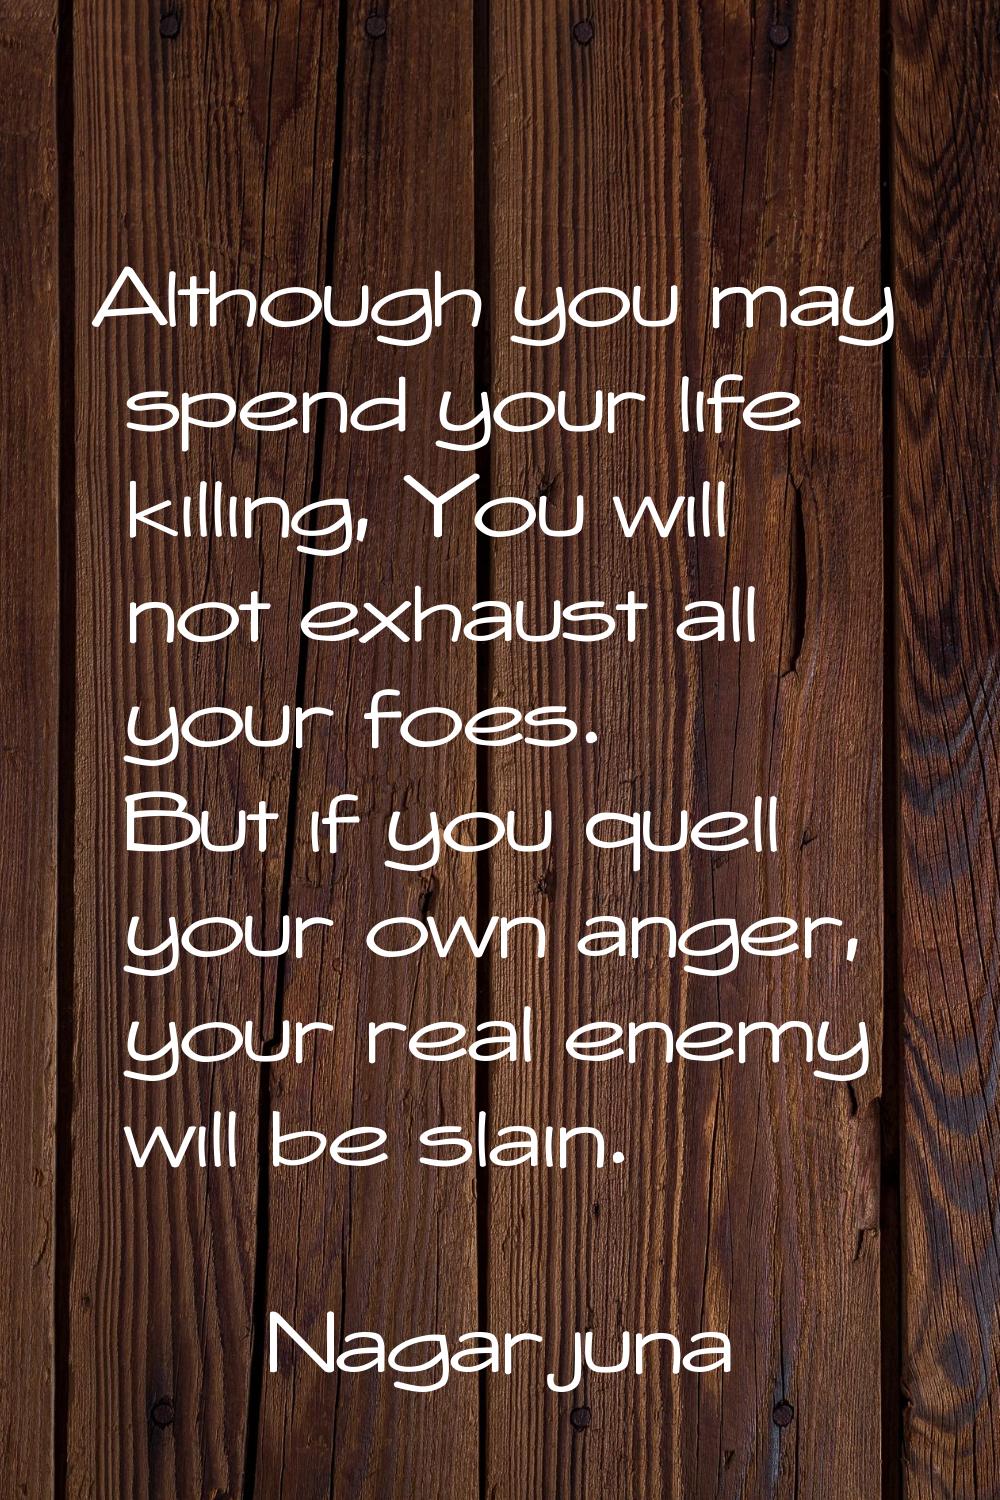 Although you may spend your life killing, You will not exhaust all your foes. But if you quell your